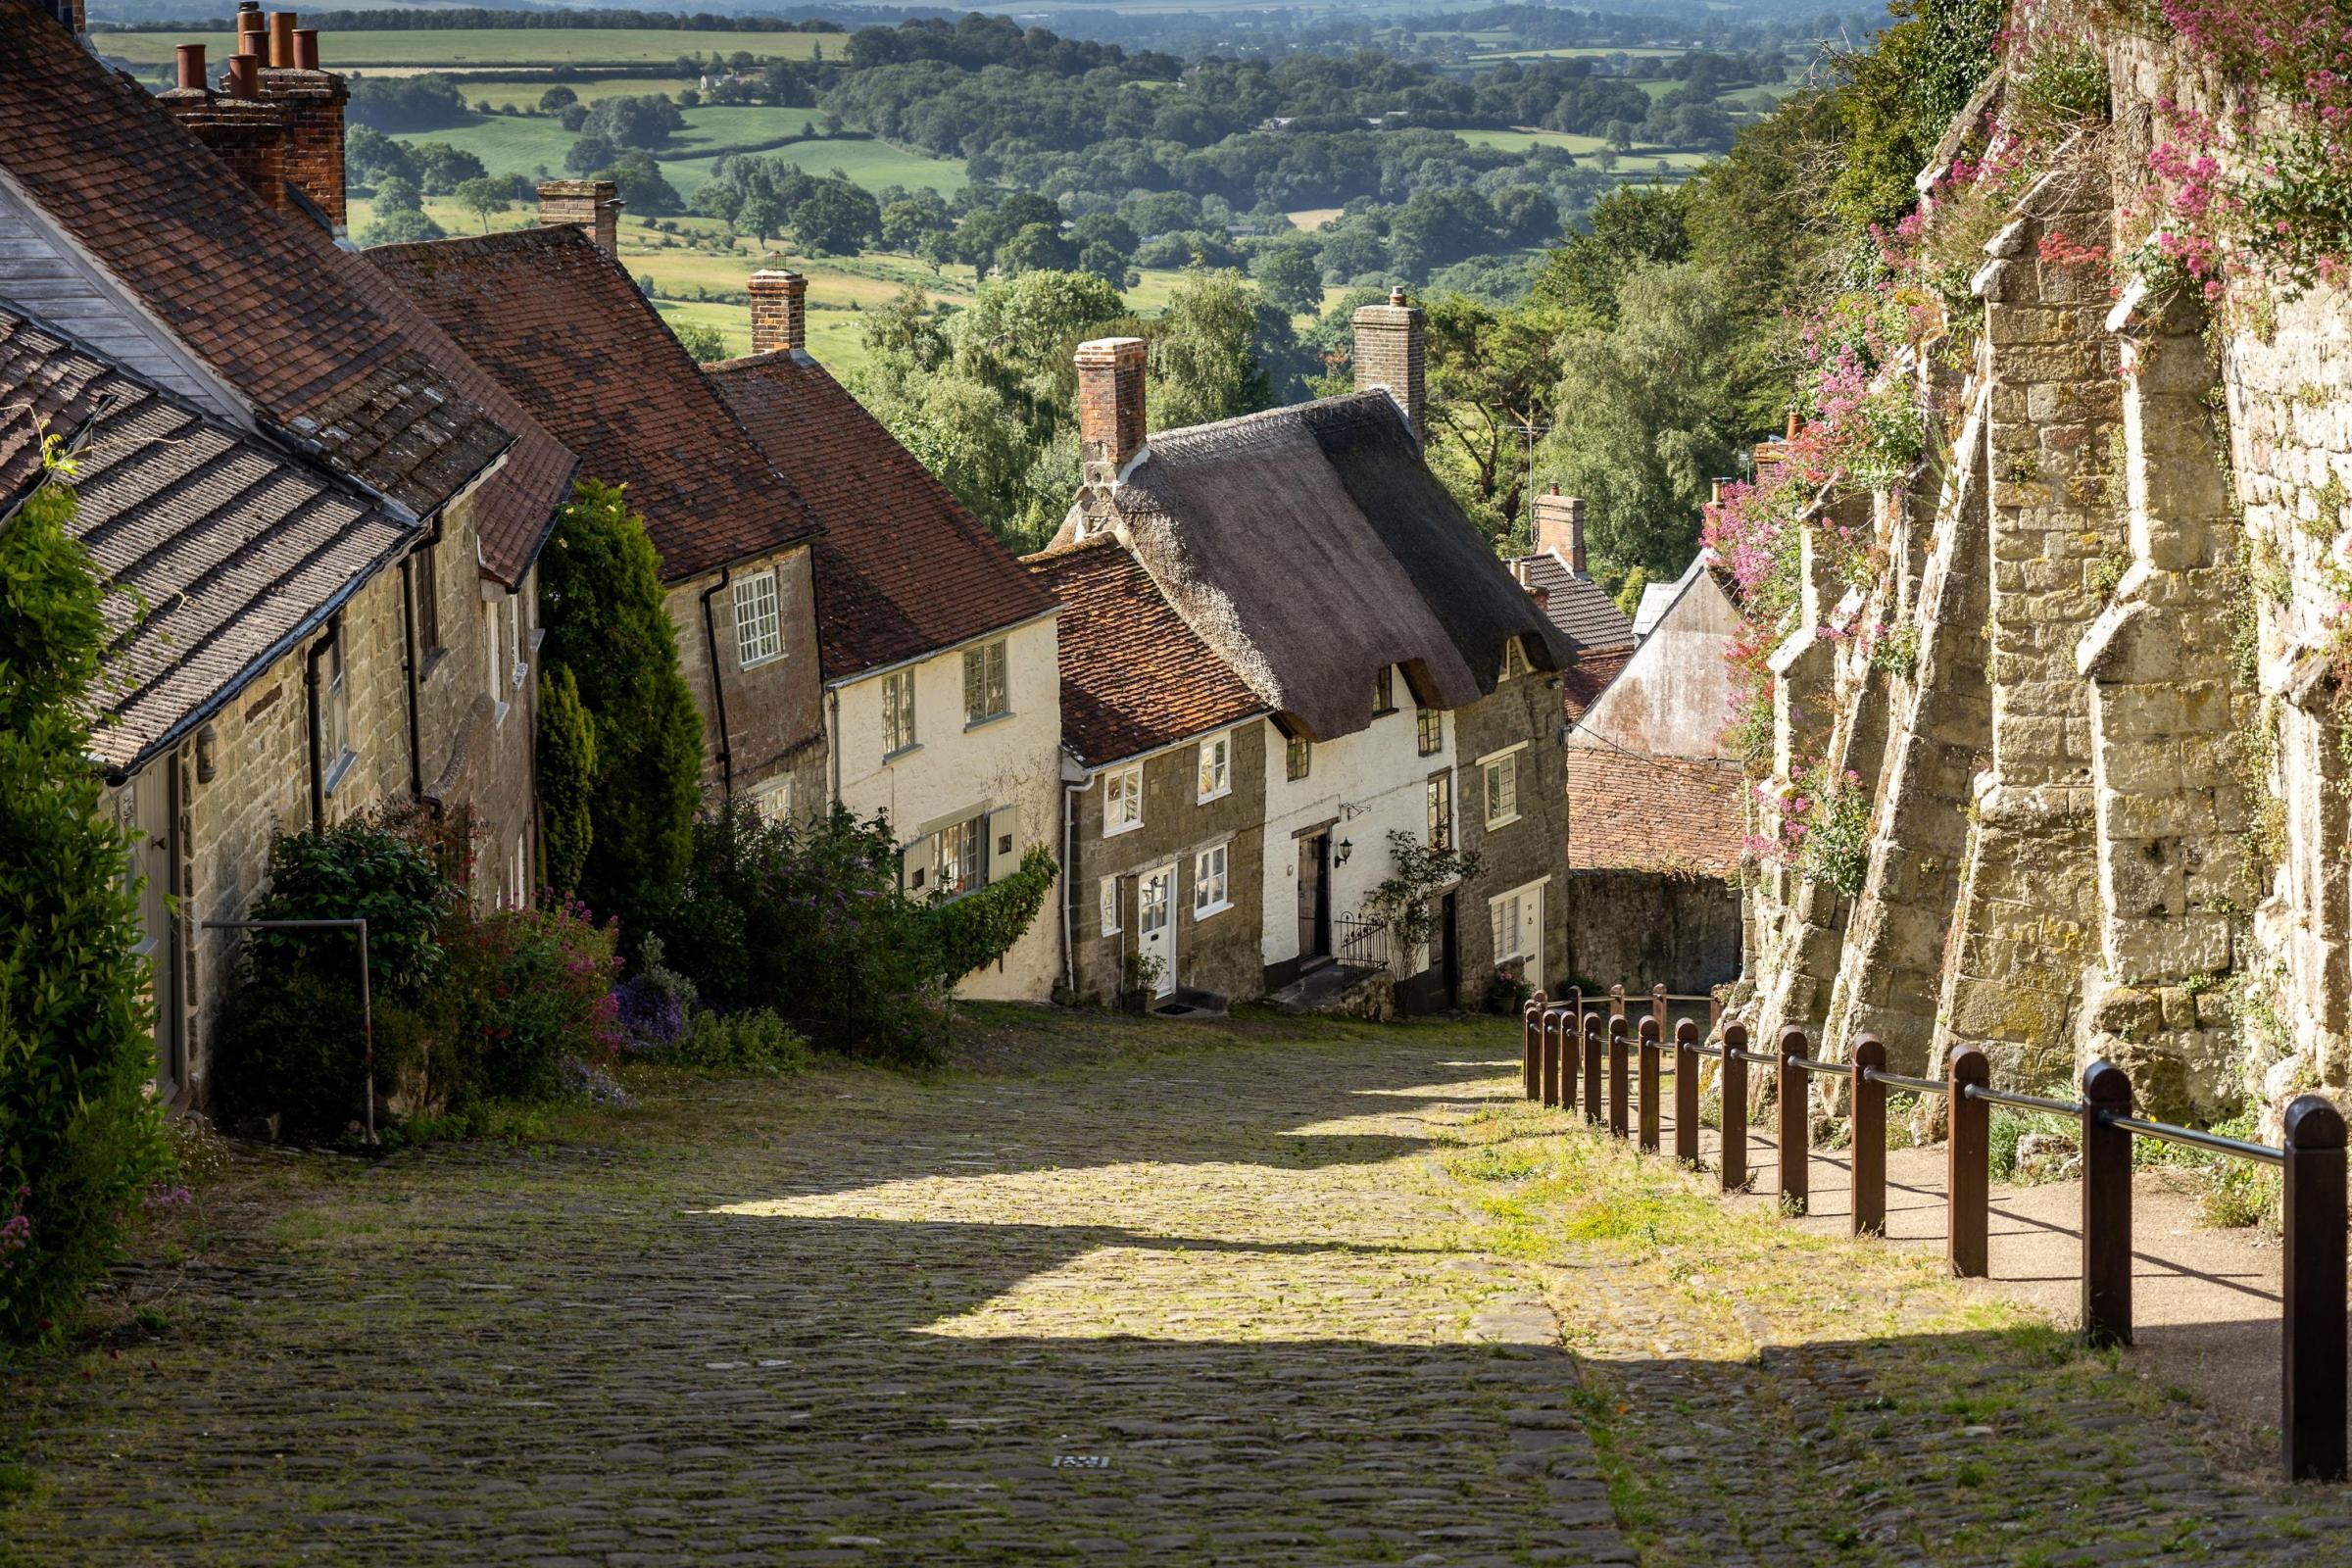 Gold Hill Shaftesbury ranked third most attractive street in UK